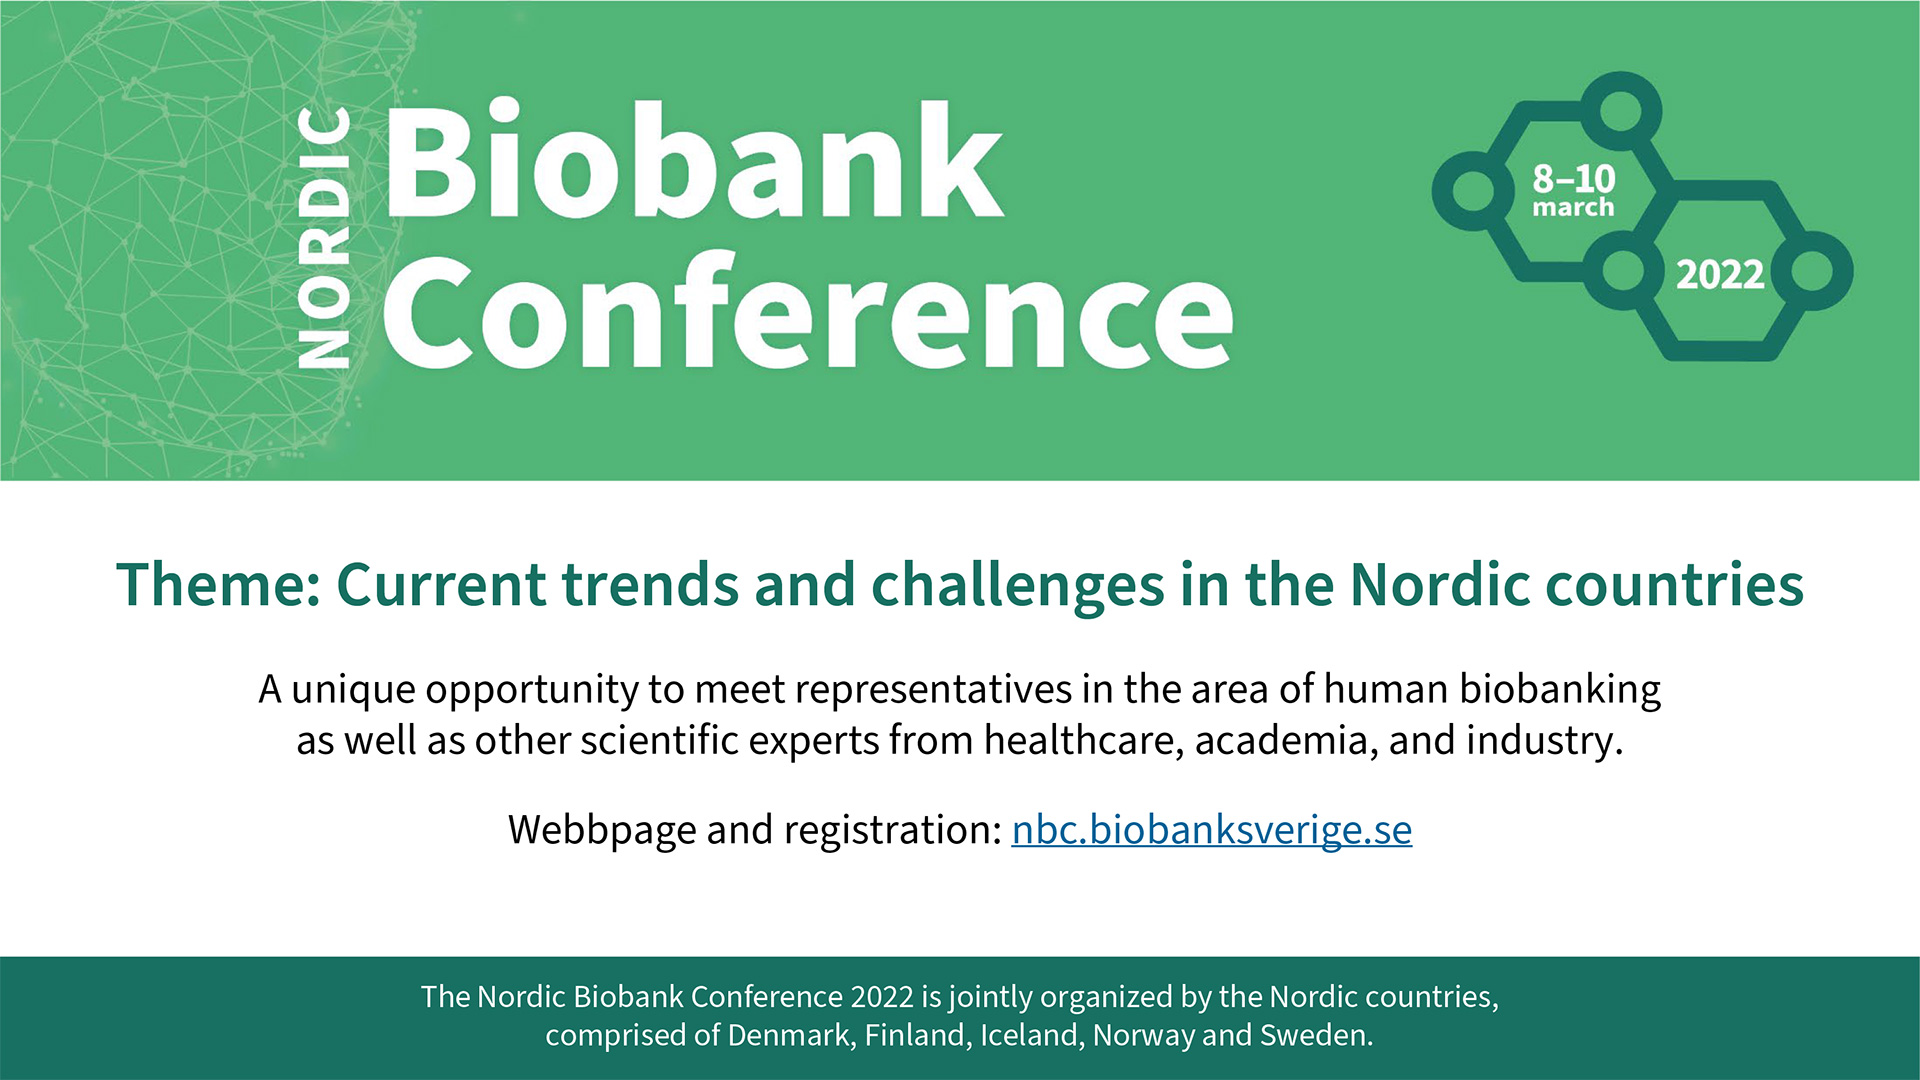 Nordic Biobank Conference - March 2022